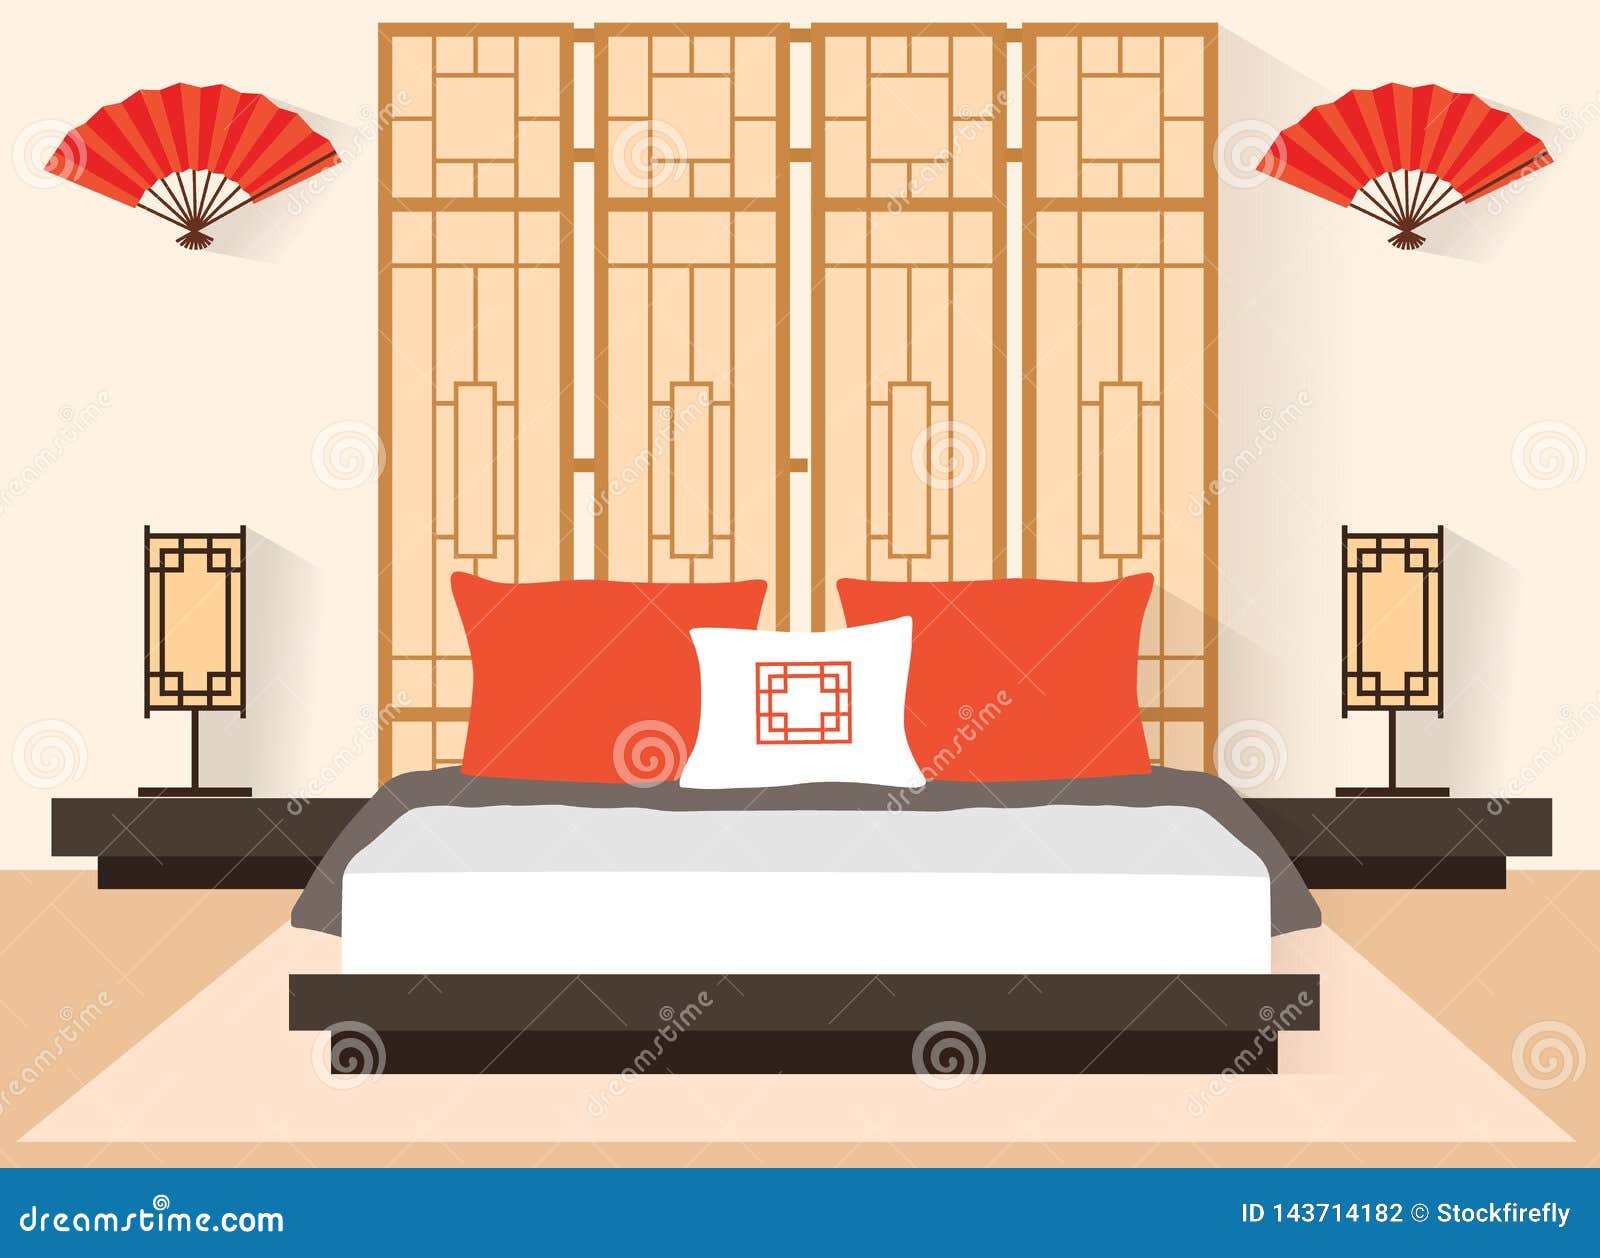 Japanese Bedroom In Flat Style. Vector Interior Room With Furniture And A  Bed Stock Vector - Illustration Of Eastern, Pillows: 143714182